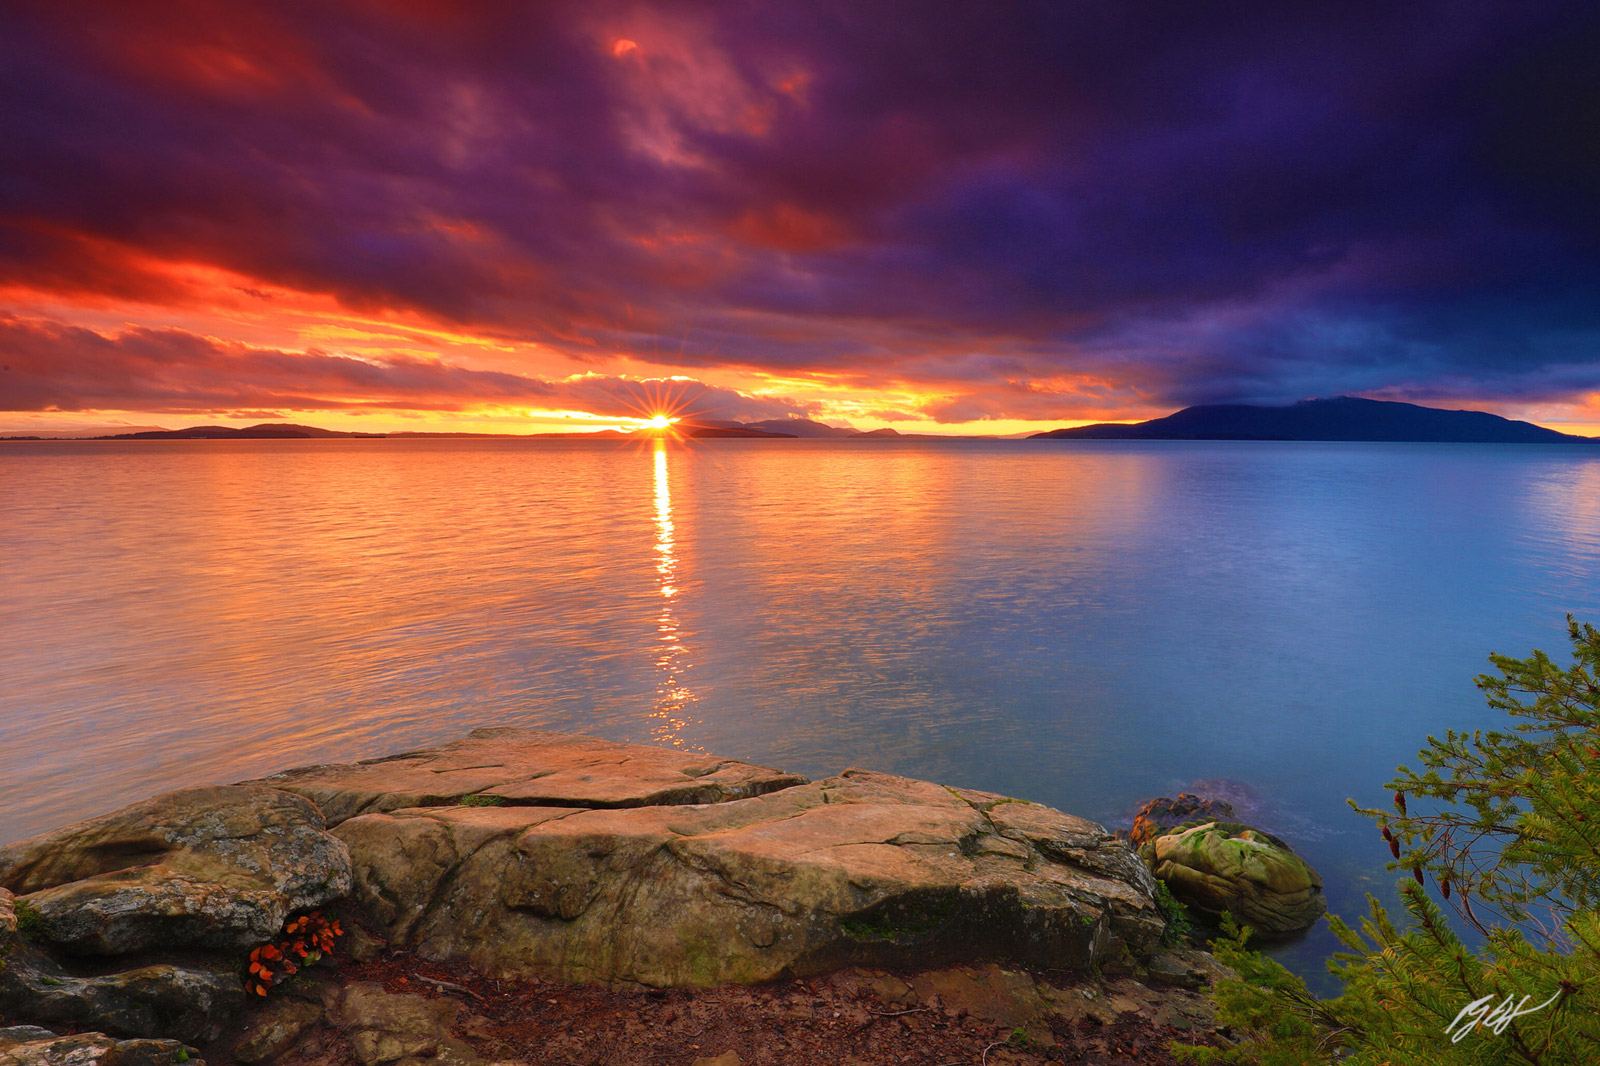 Sunset with the San Juan Islands from Larabee State Park in Washington